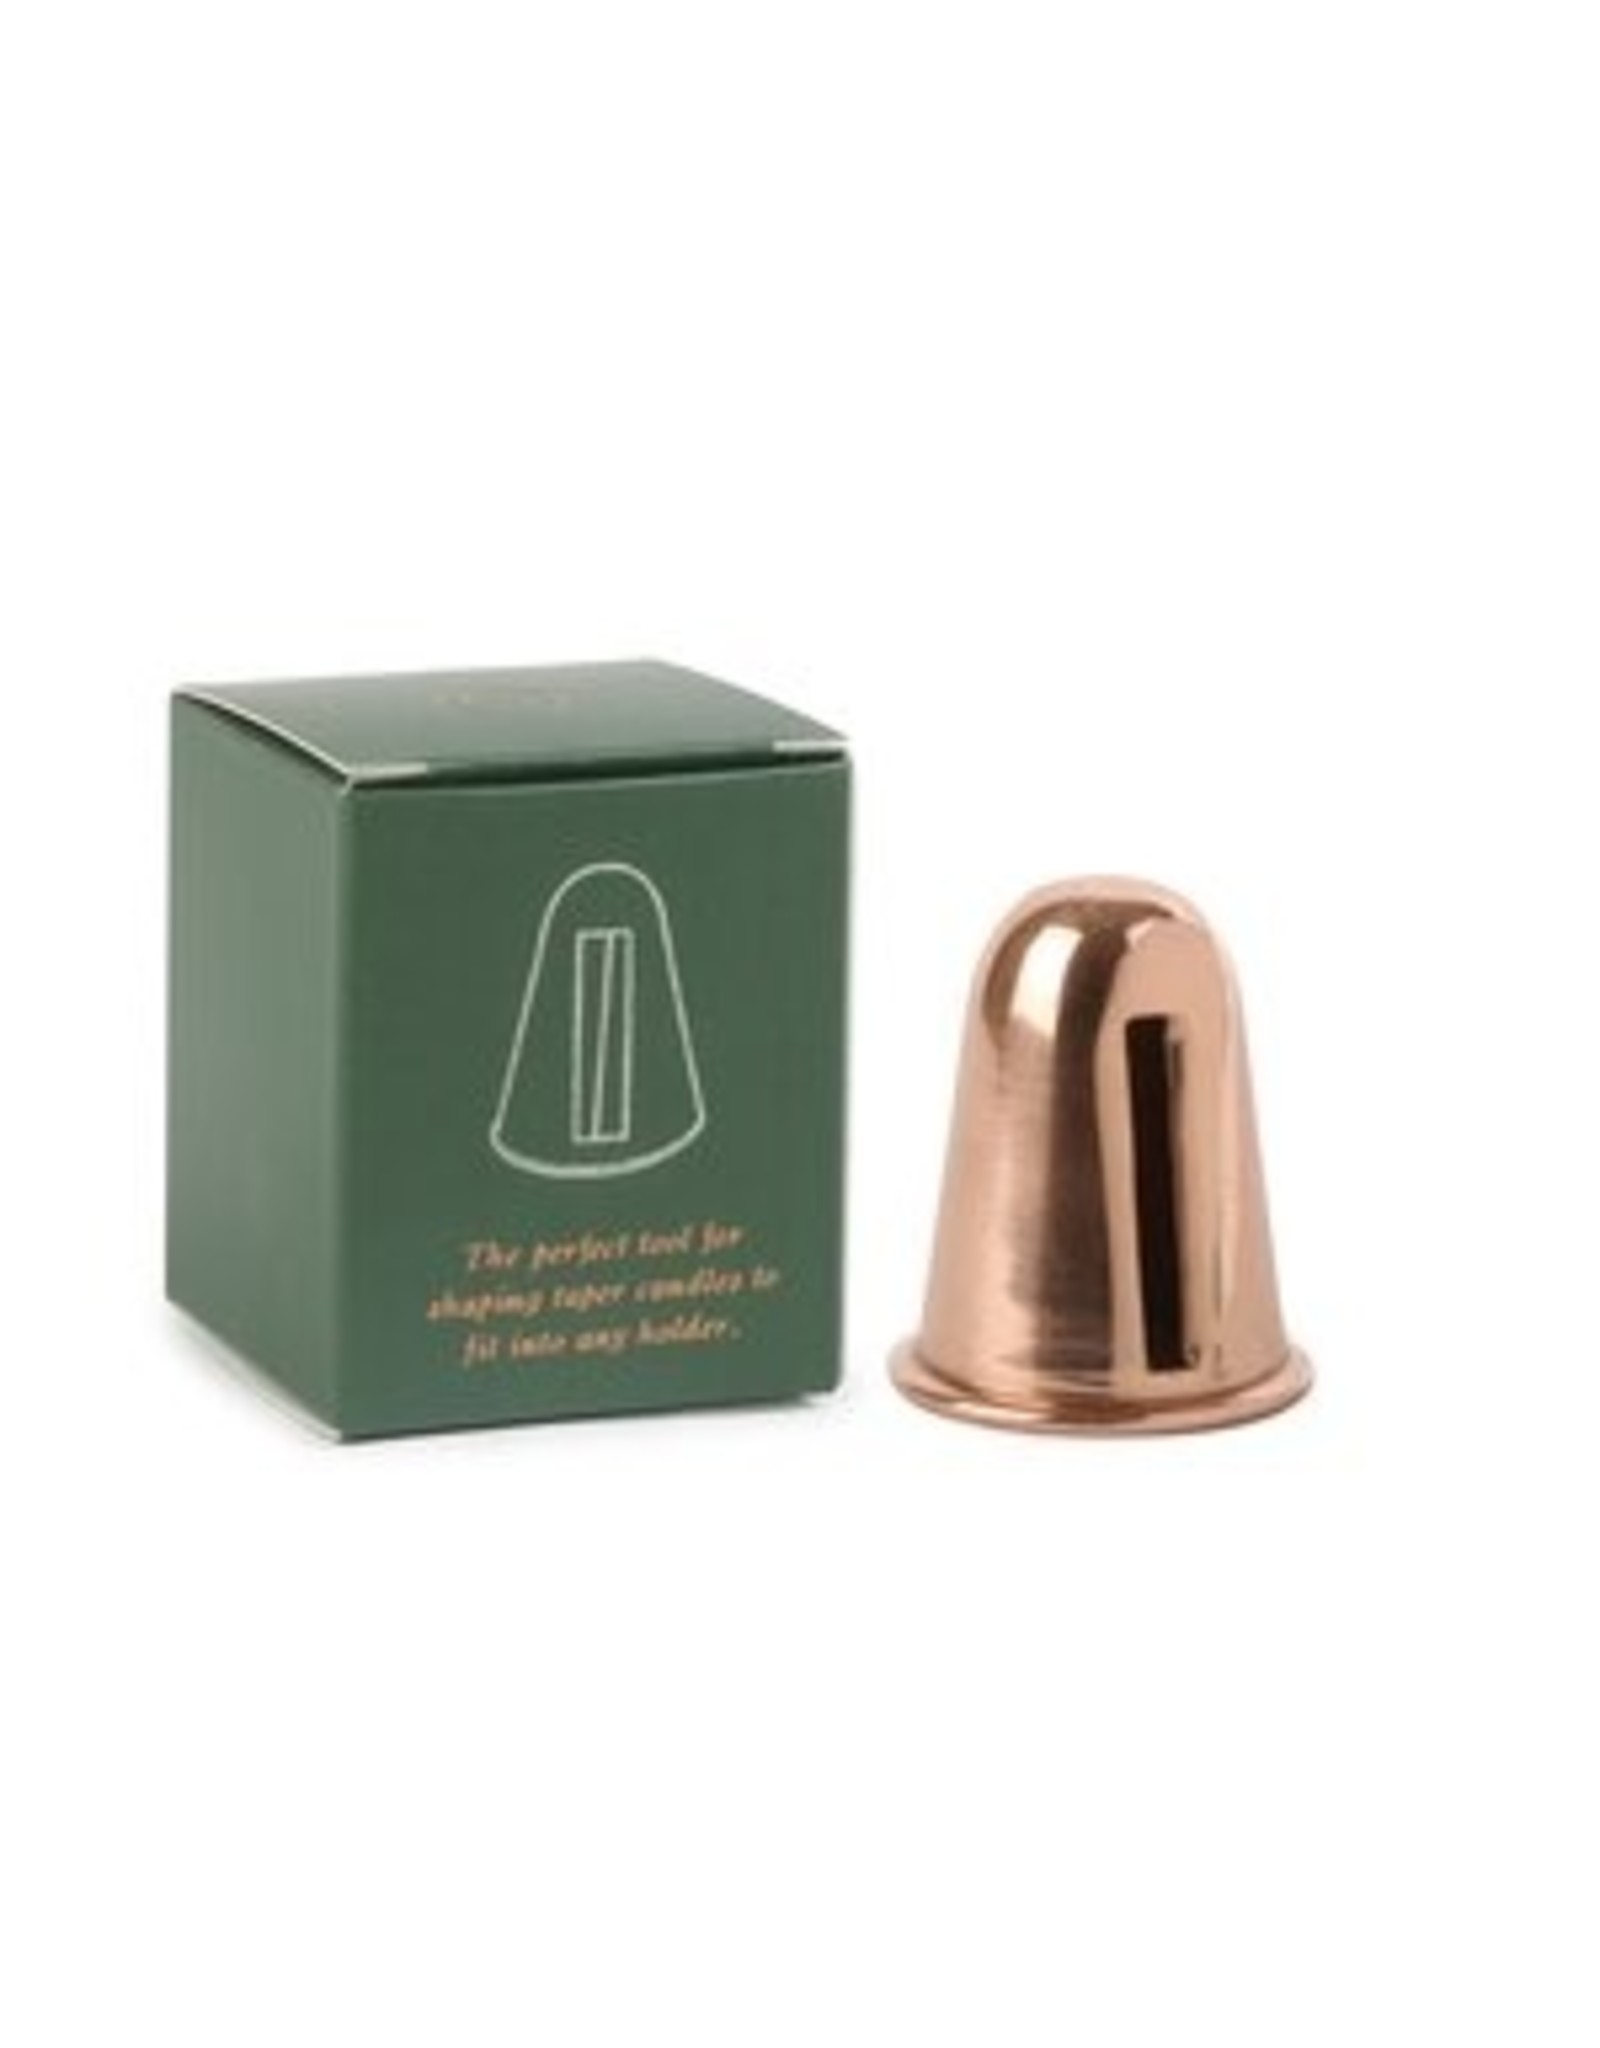 Floral Society Copper Candle Sharpener